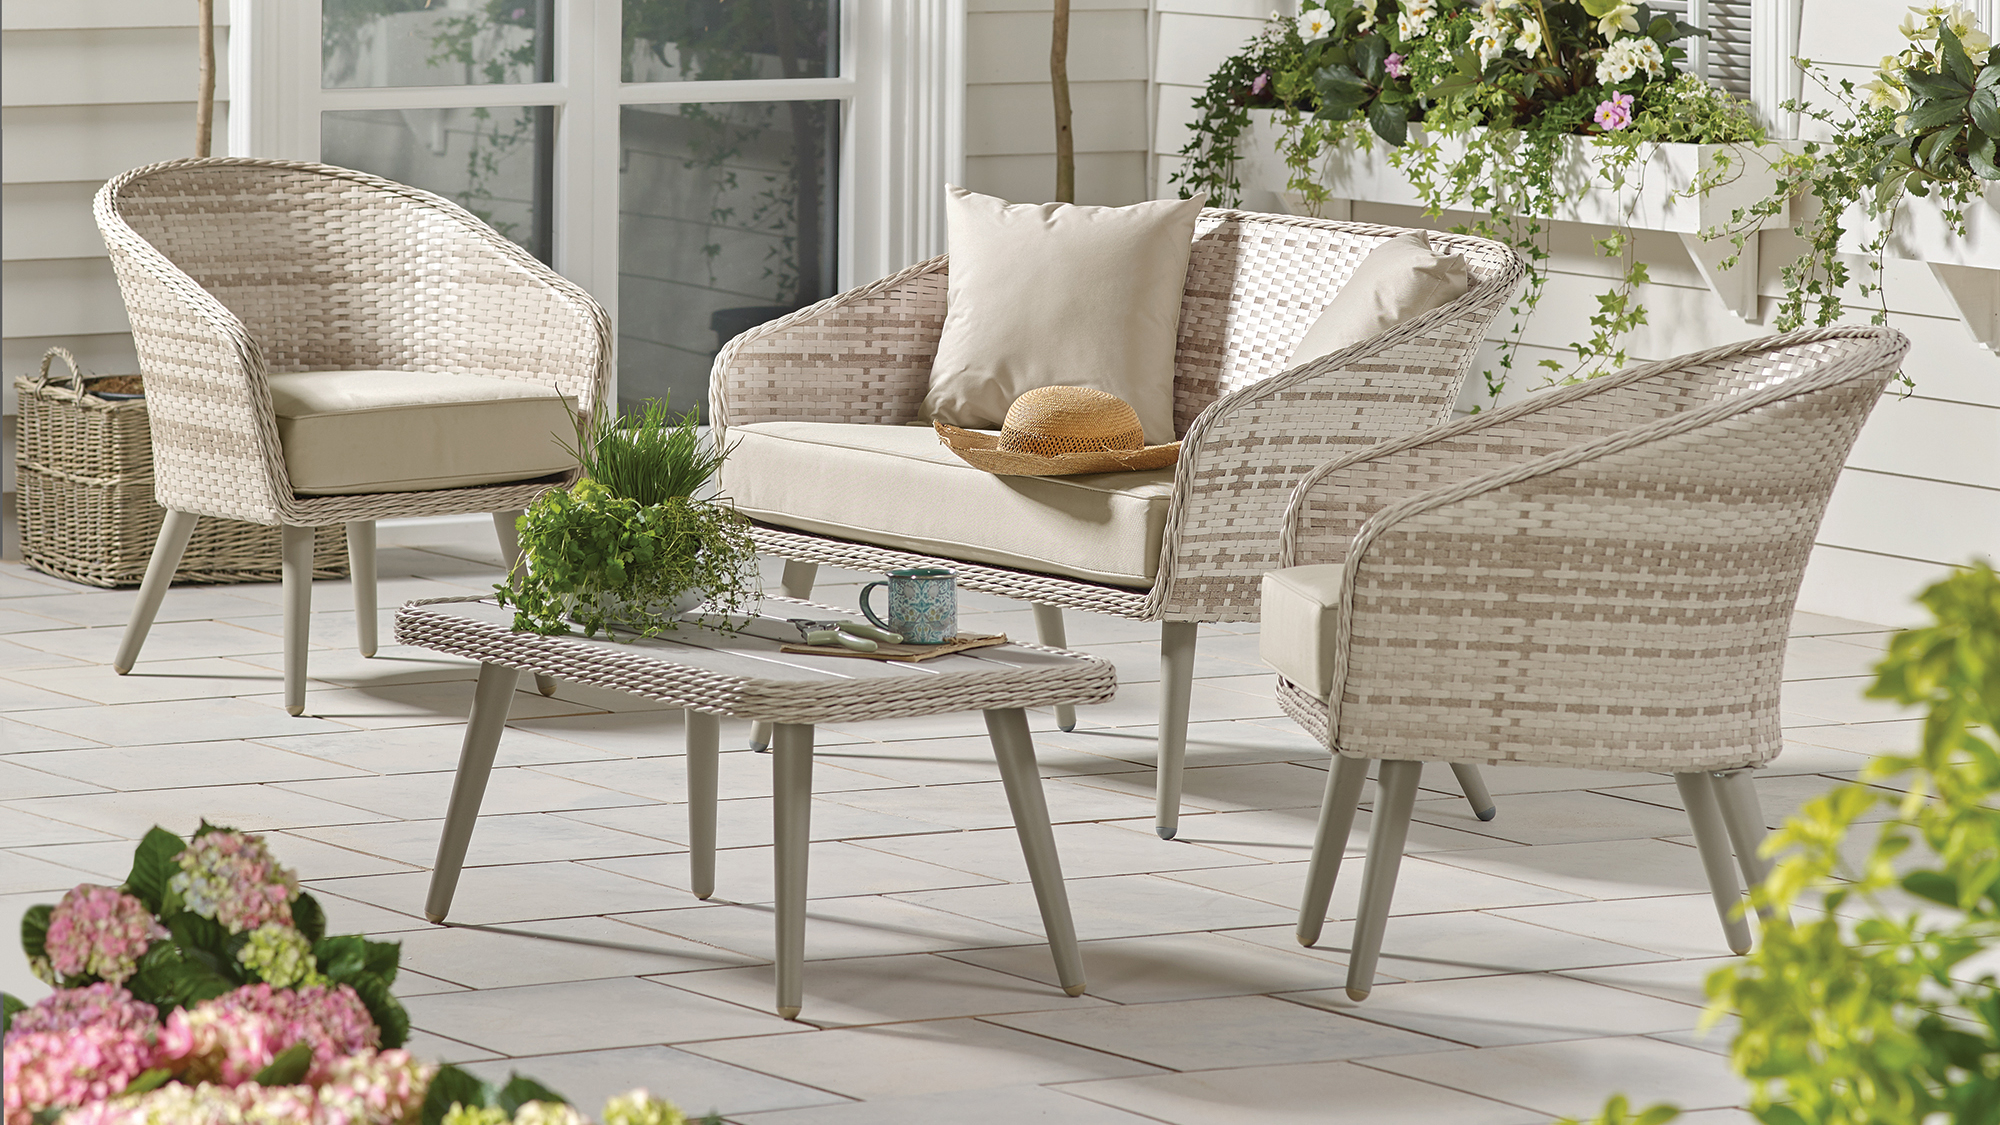 Best Garden Furniture 2019 Make The Most Of The Summer with sizing 2000 X 1125